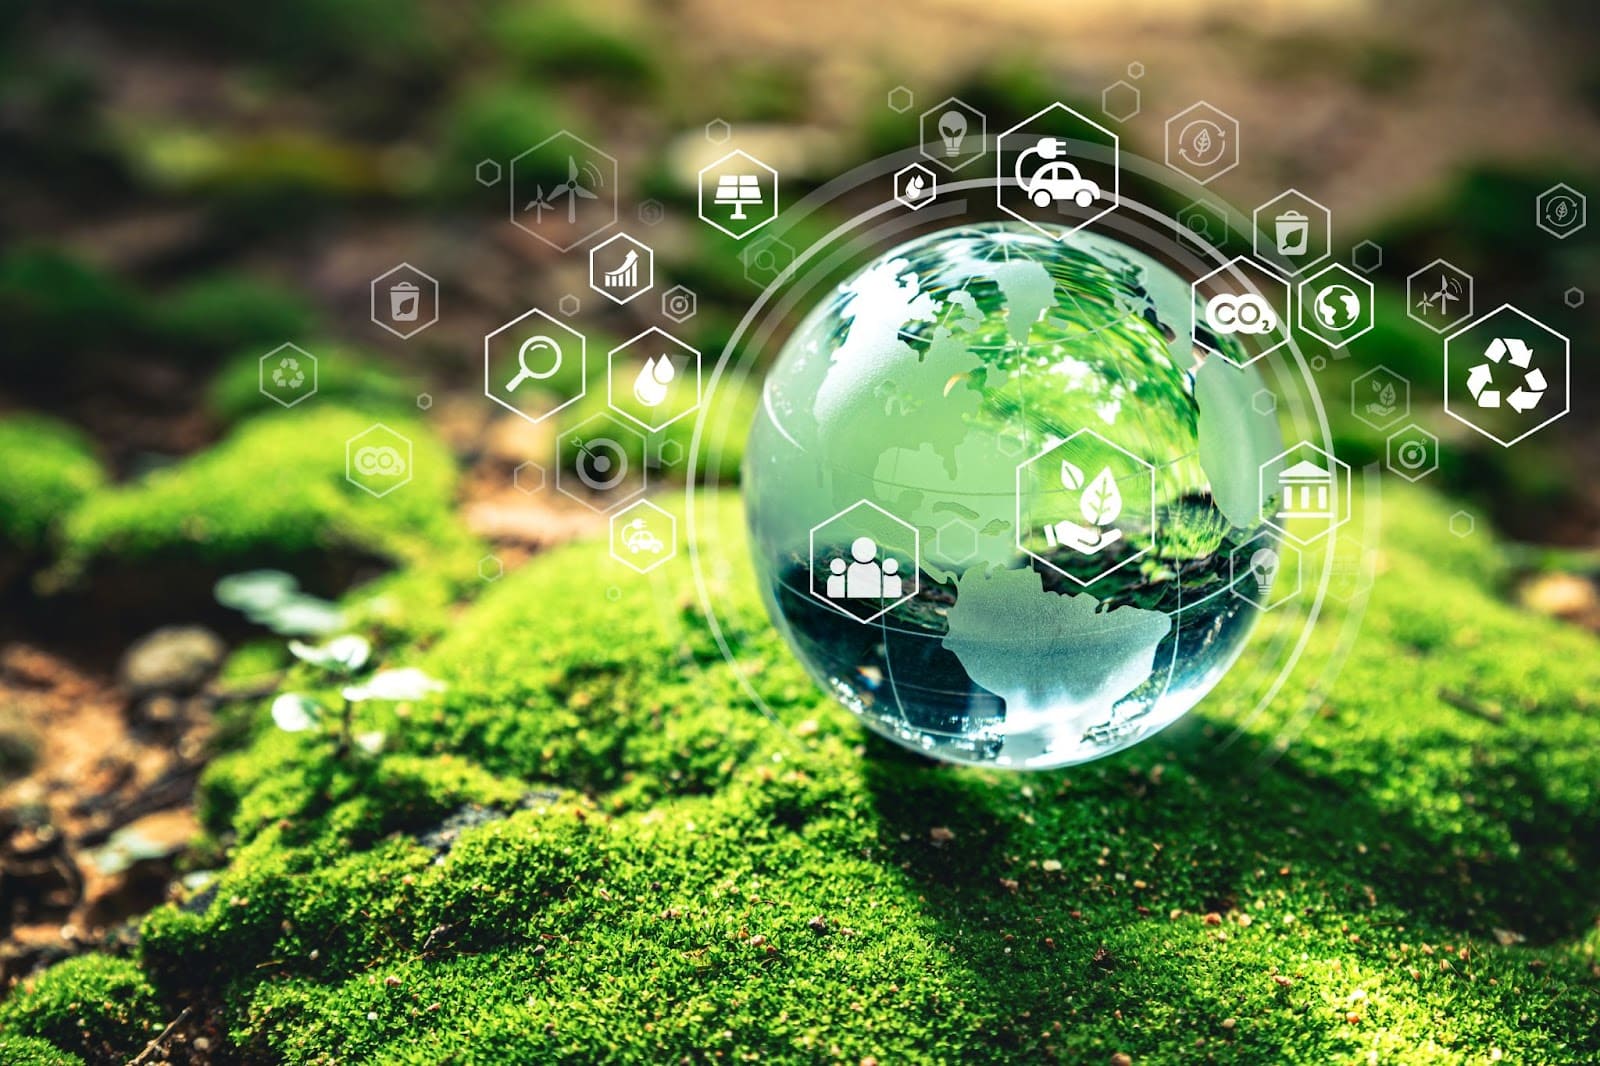 Crystal globe on moss with environmental icons, representing the concept of impact investing for a sustainable world.